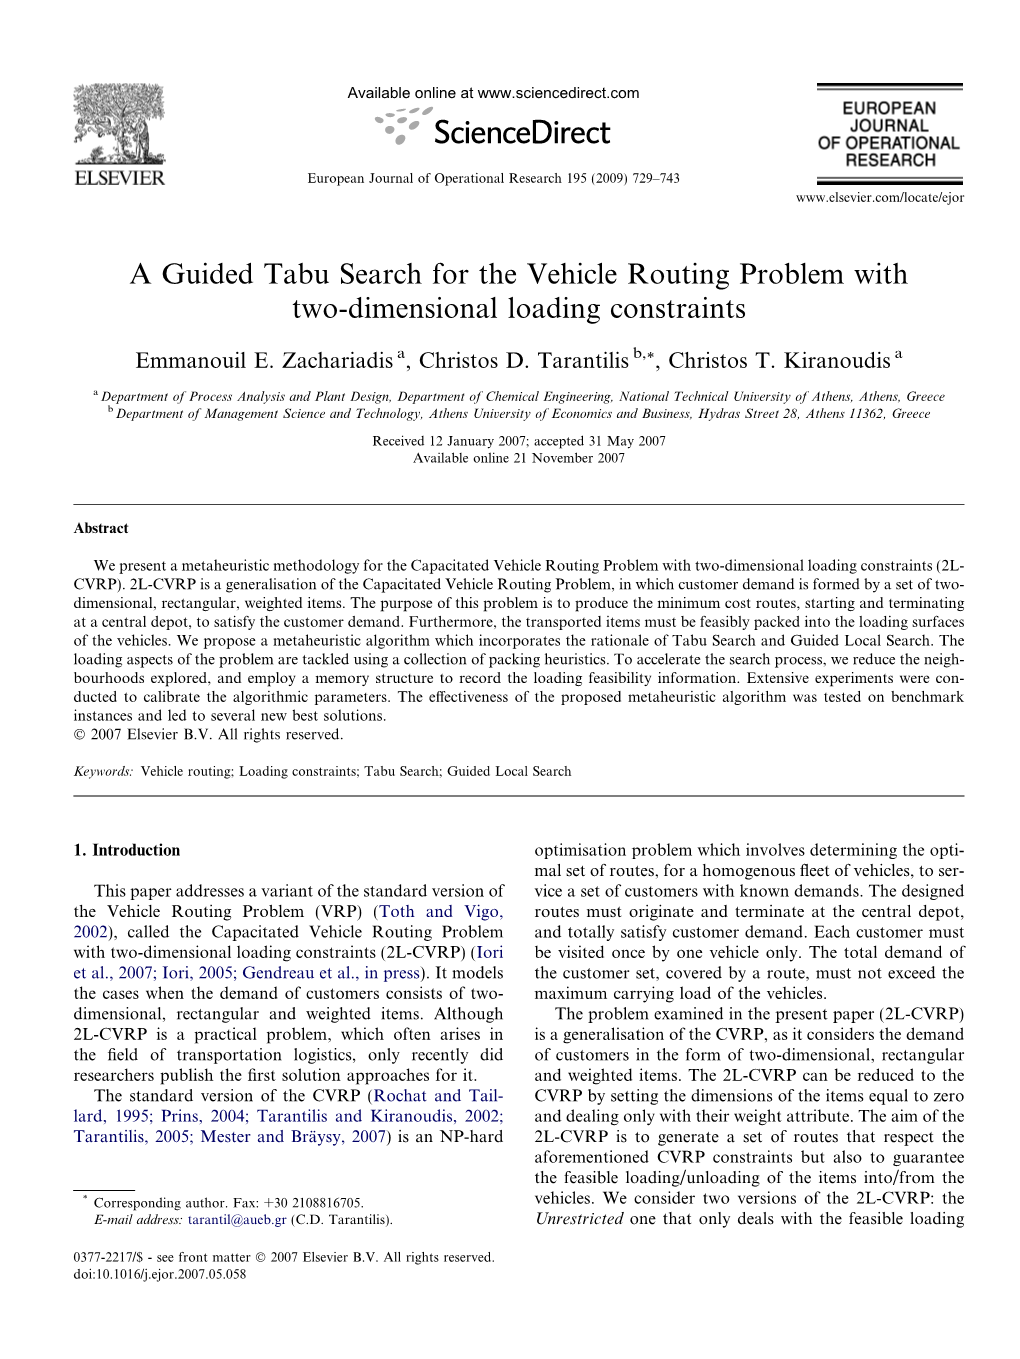 A Guided Tabu Search for the Vehicle Routing Problem with Two-Dimensional Loading Constraints